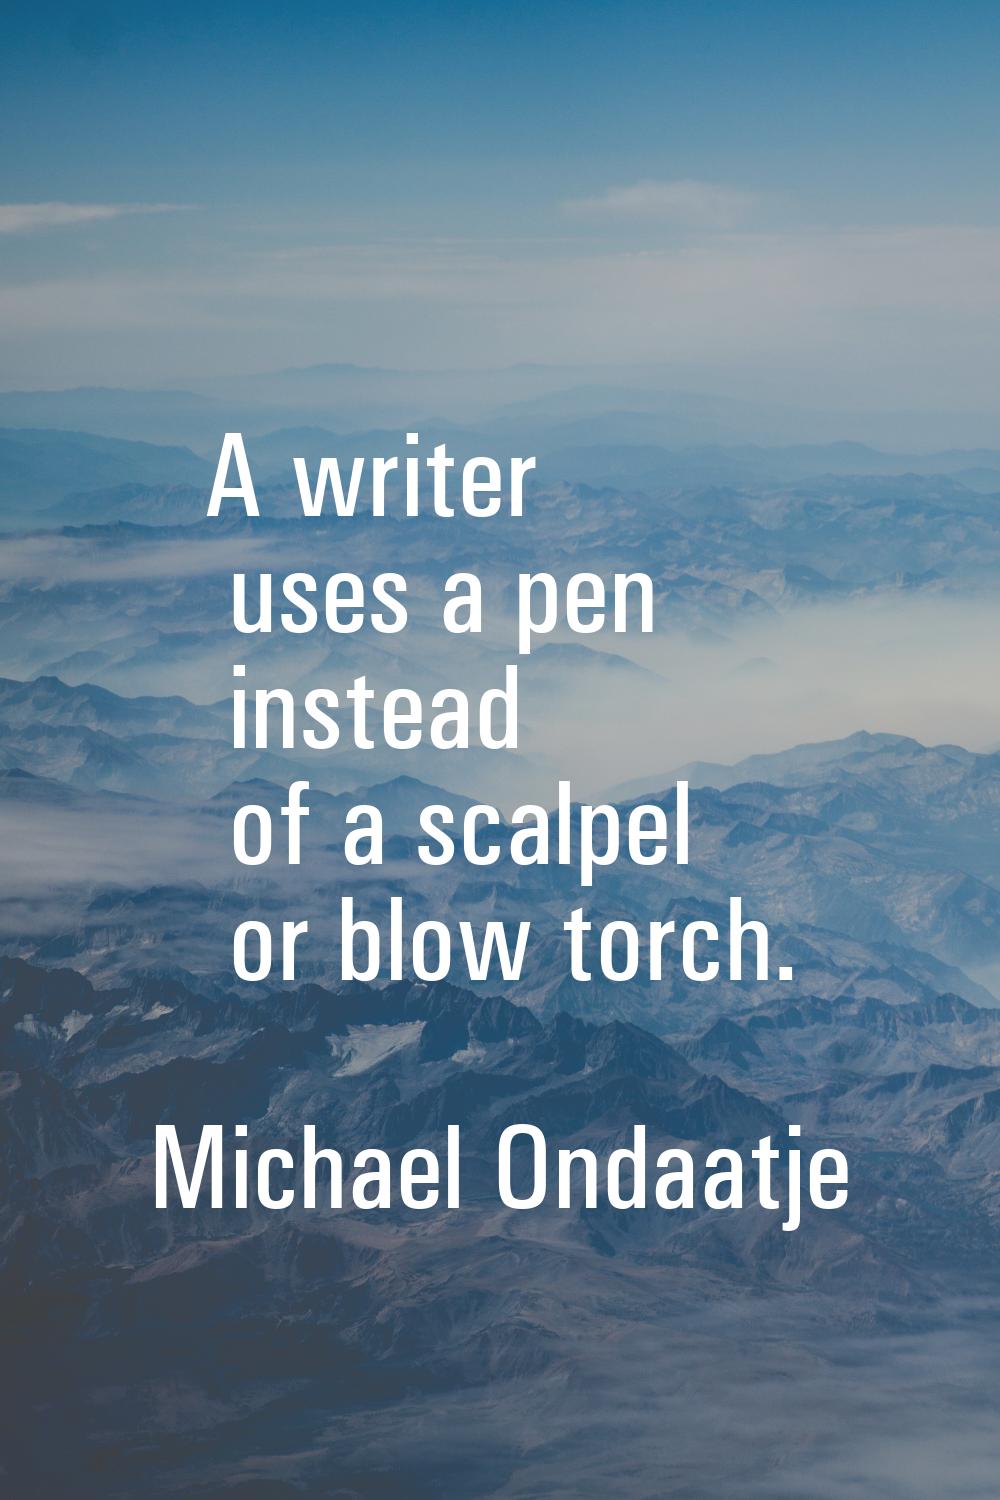 A writer uses a pen instead of a scalpel or blow torch.